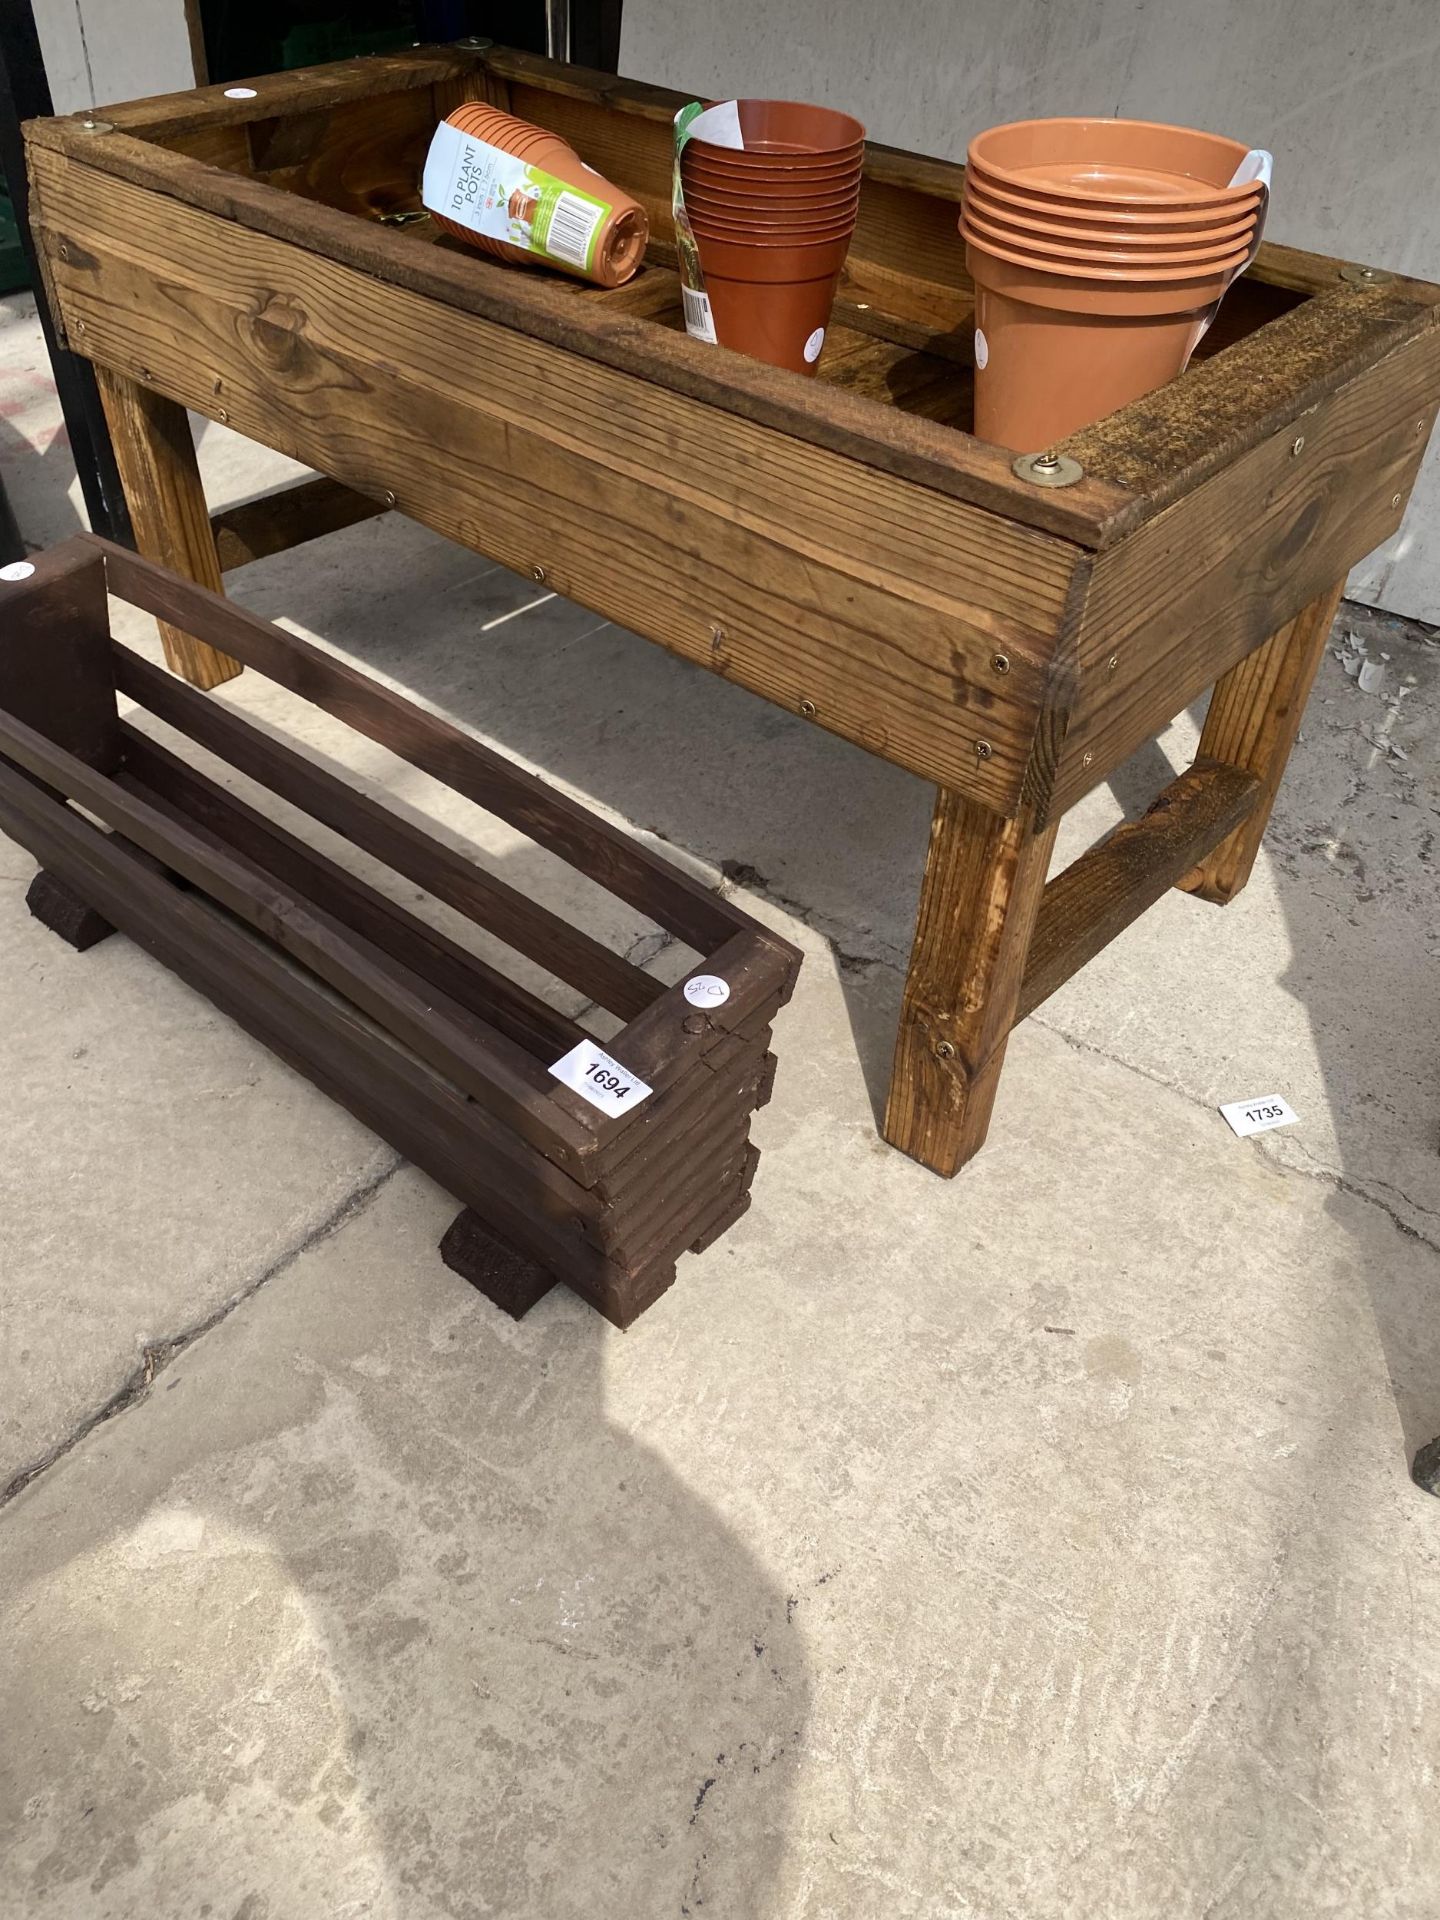 A WOODEN PLANTER, A SMALL WOODEN TROUGH AND VARIOUS PLASTIC PLANT POTS - Image 2 of 2